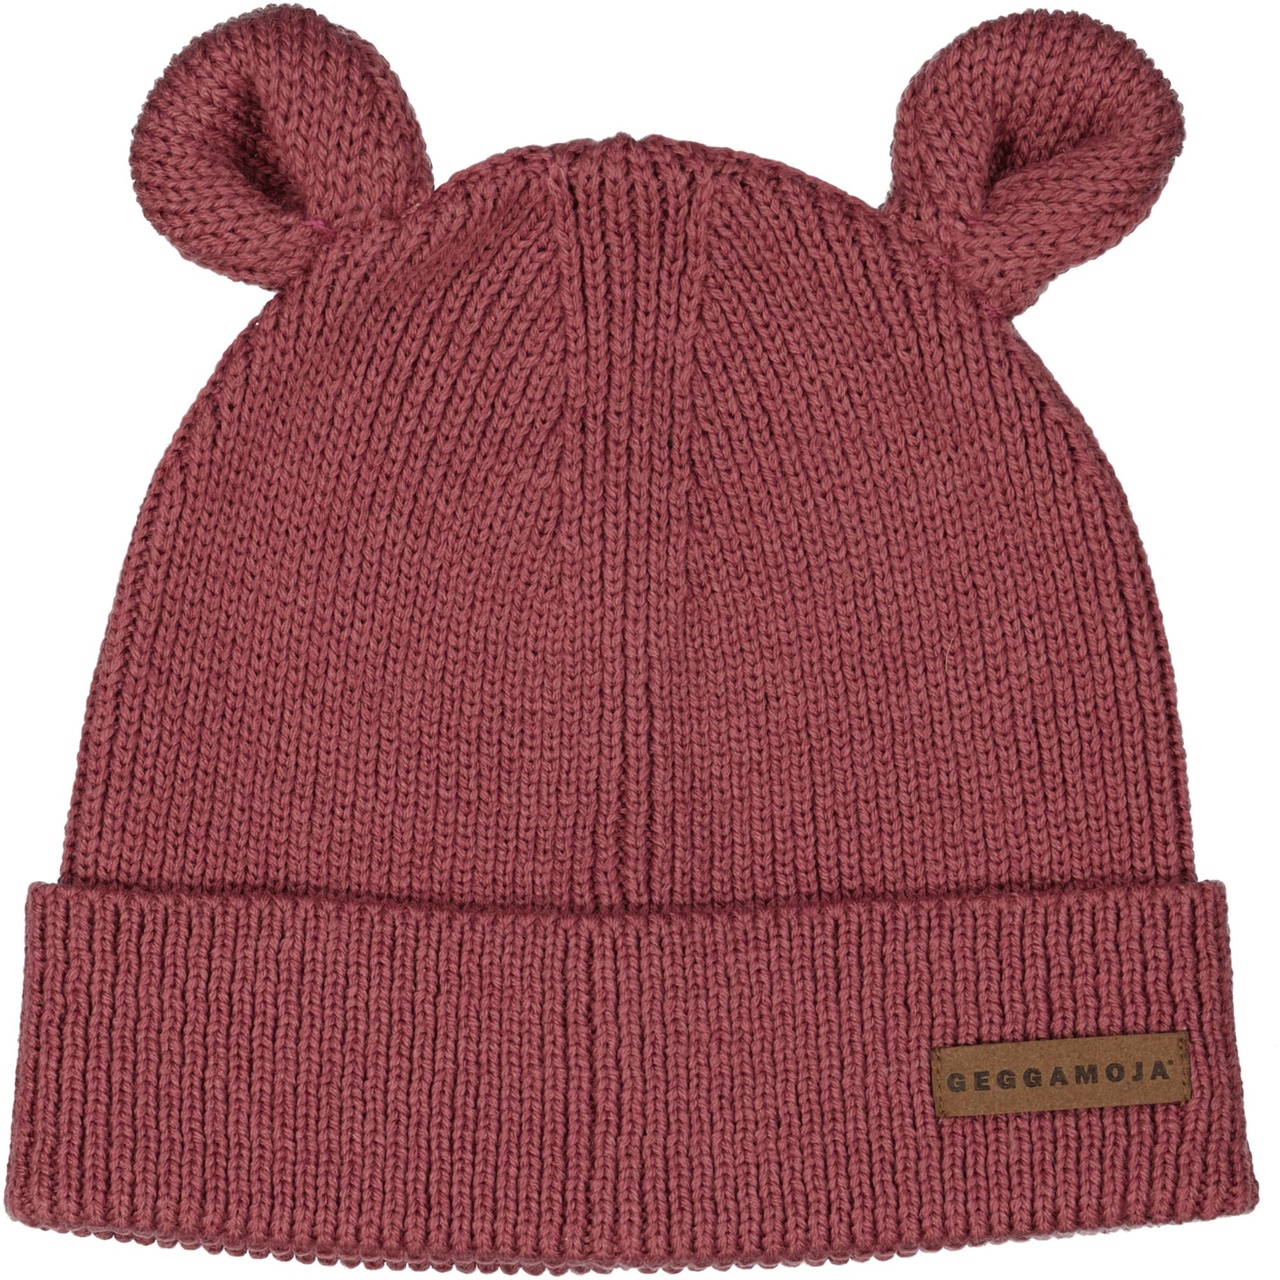 Knitted beanie ears Rose  2-6Y